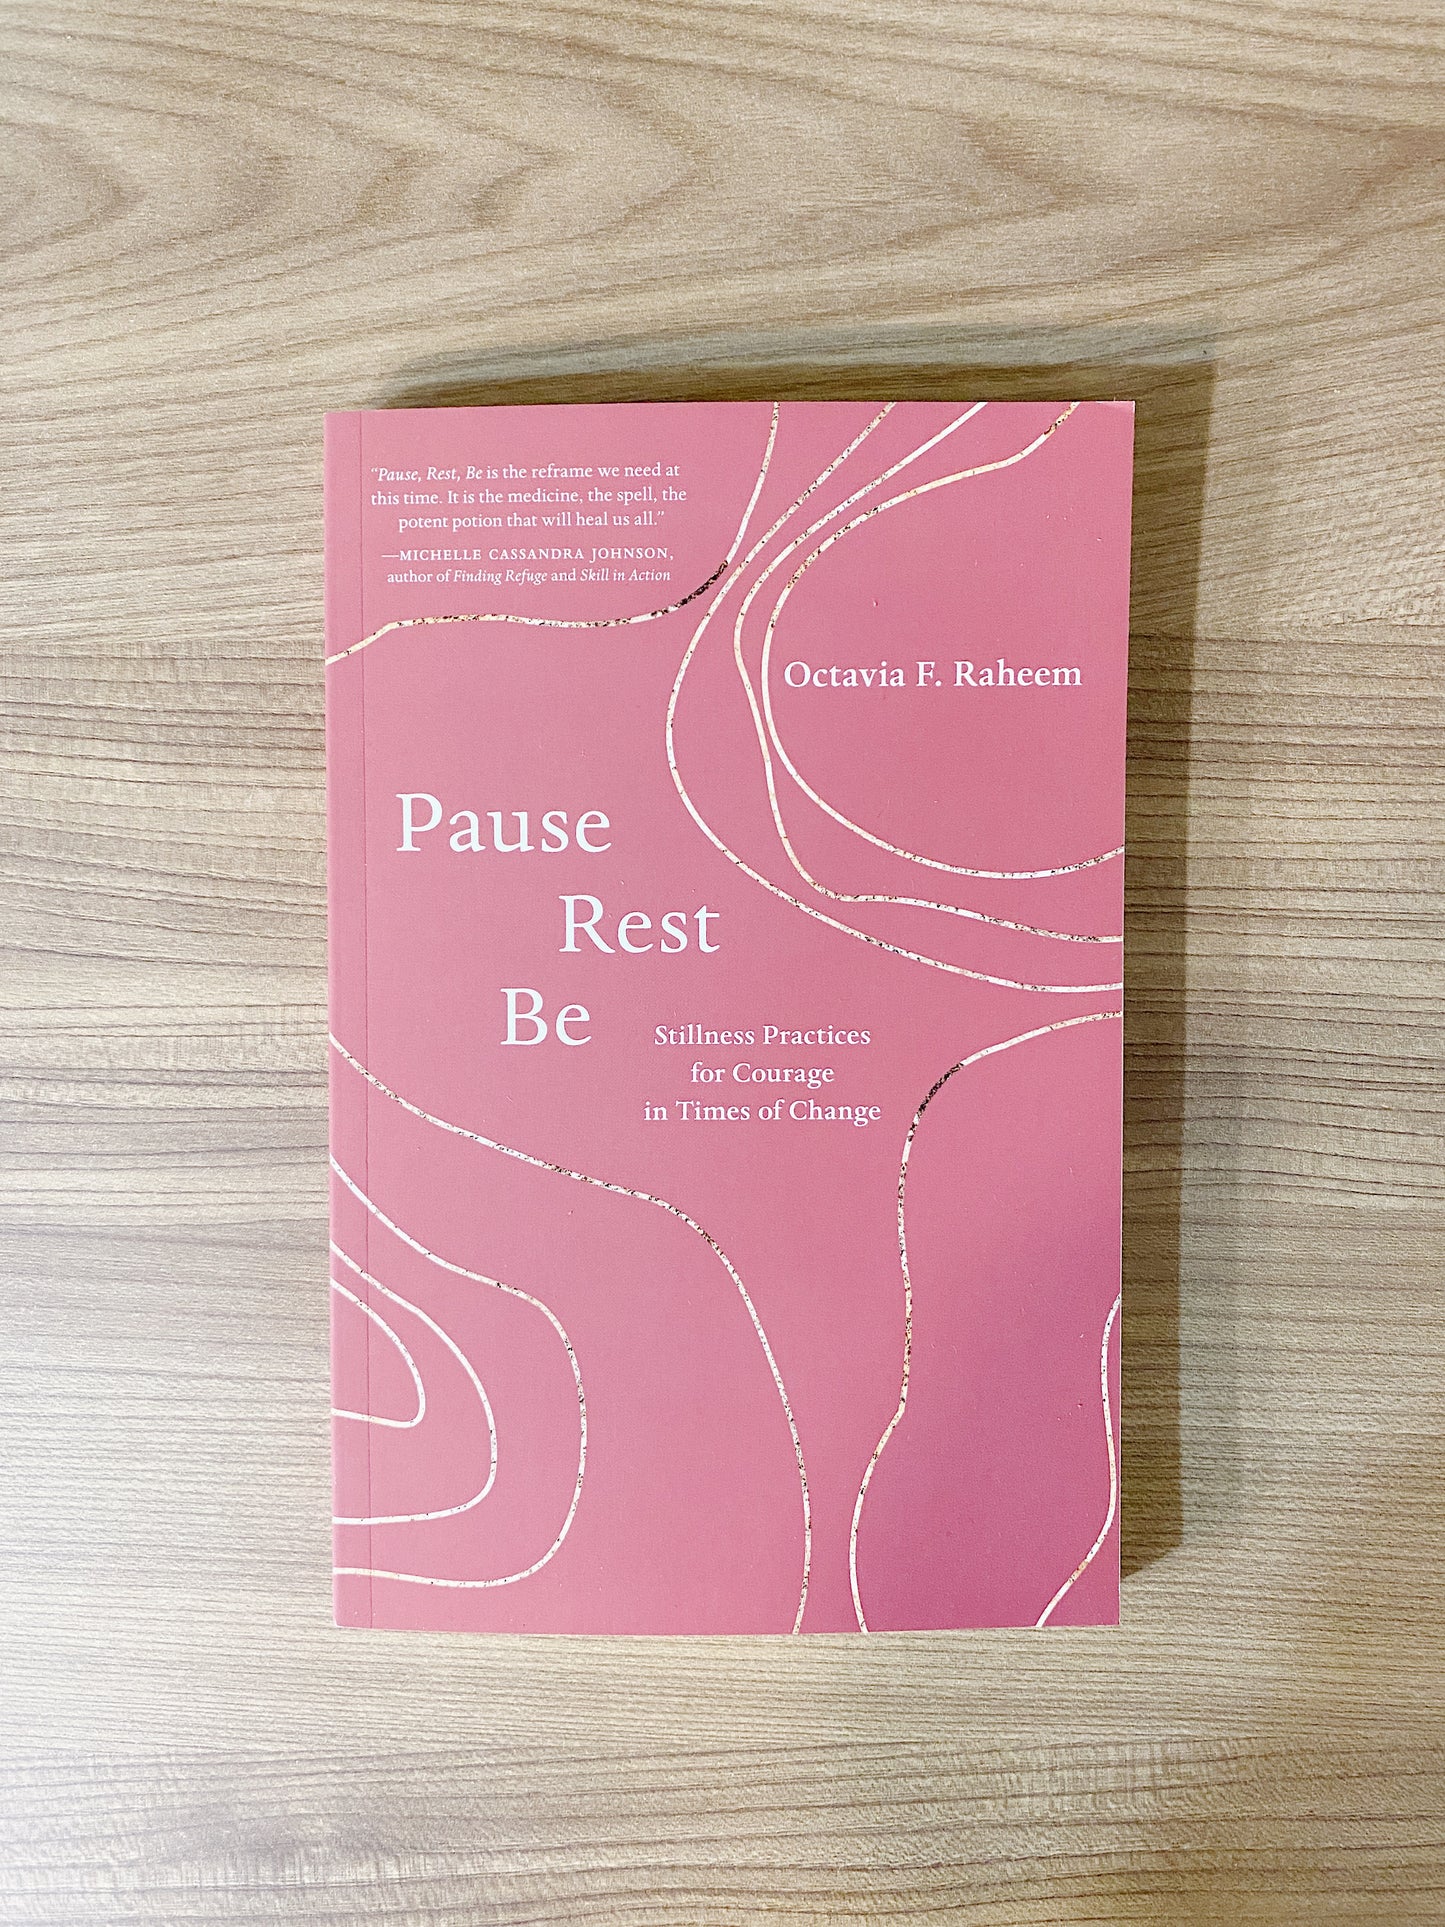 Octavia F. Raheem - Pause, Rest, Be: Stillness Practices for Courage in Times of Change